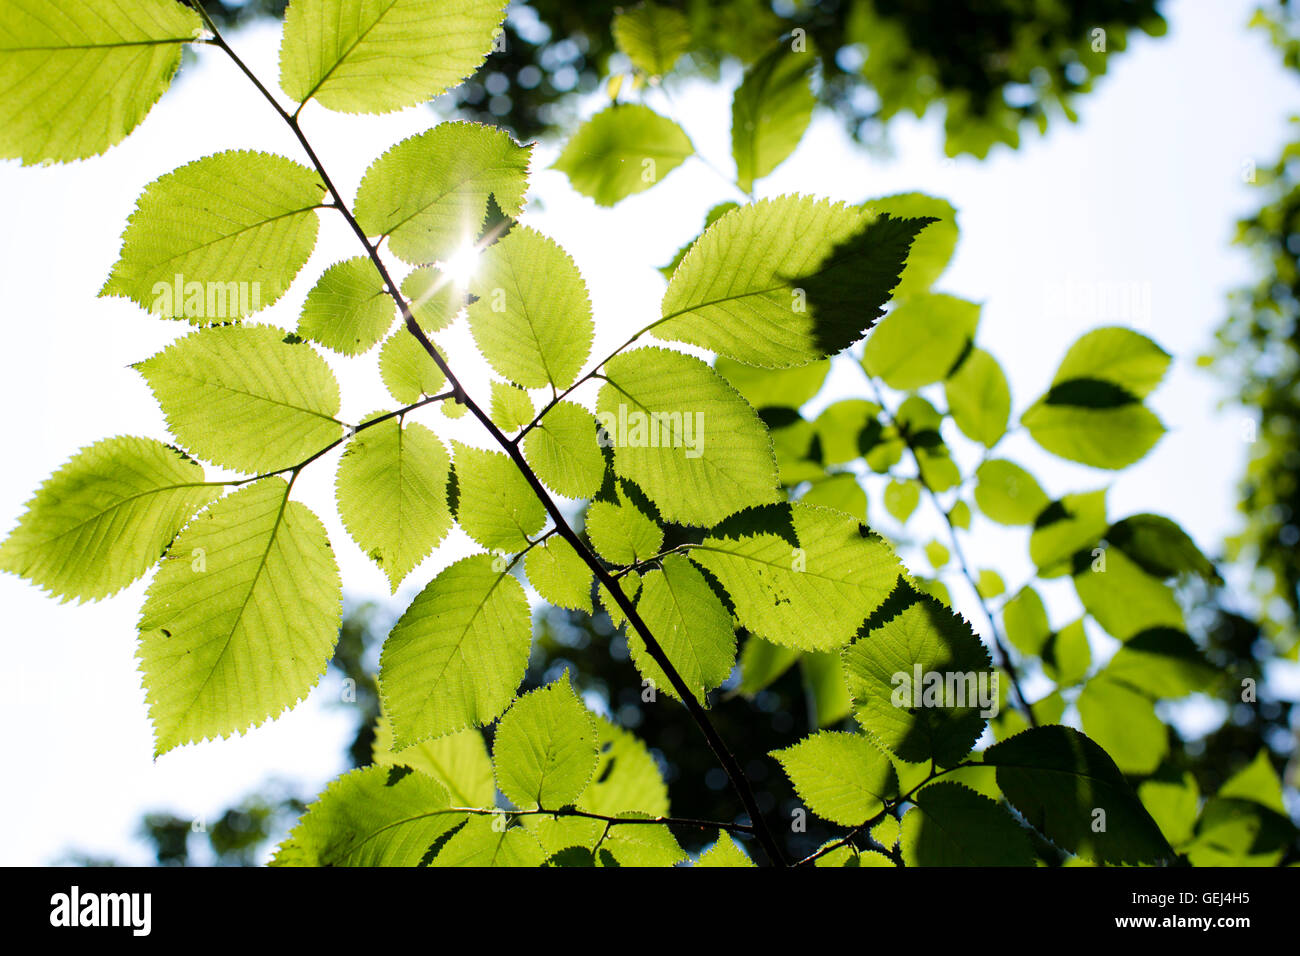 Shafts of sunlight making the leaves of a tree glow as it passes through the vegitation. In this tightly packed dense forest the light looks almost surreal as it illumintates the darkness. Stock Photo